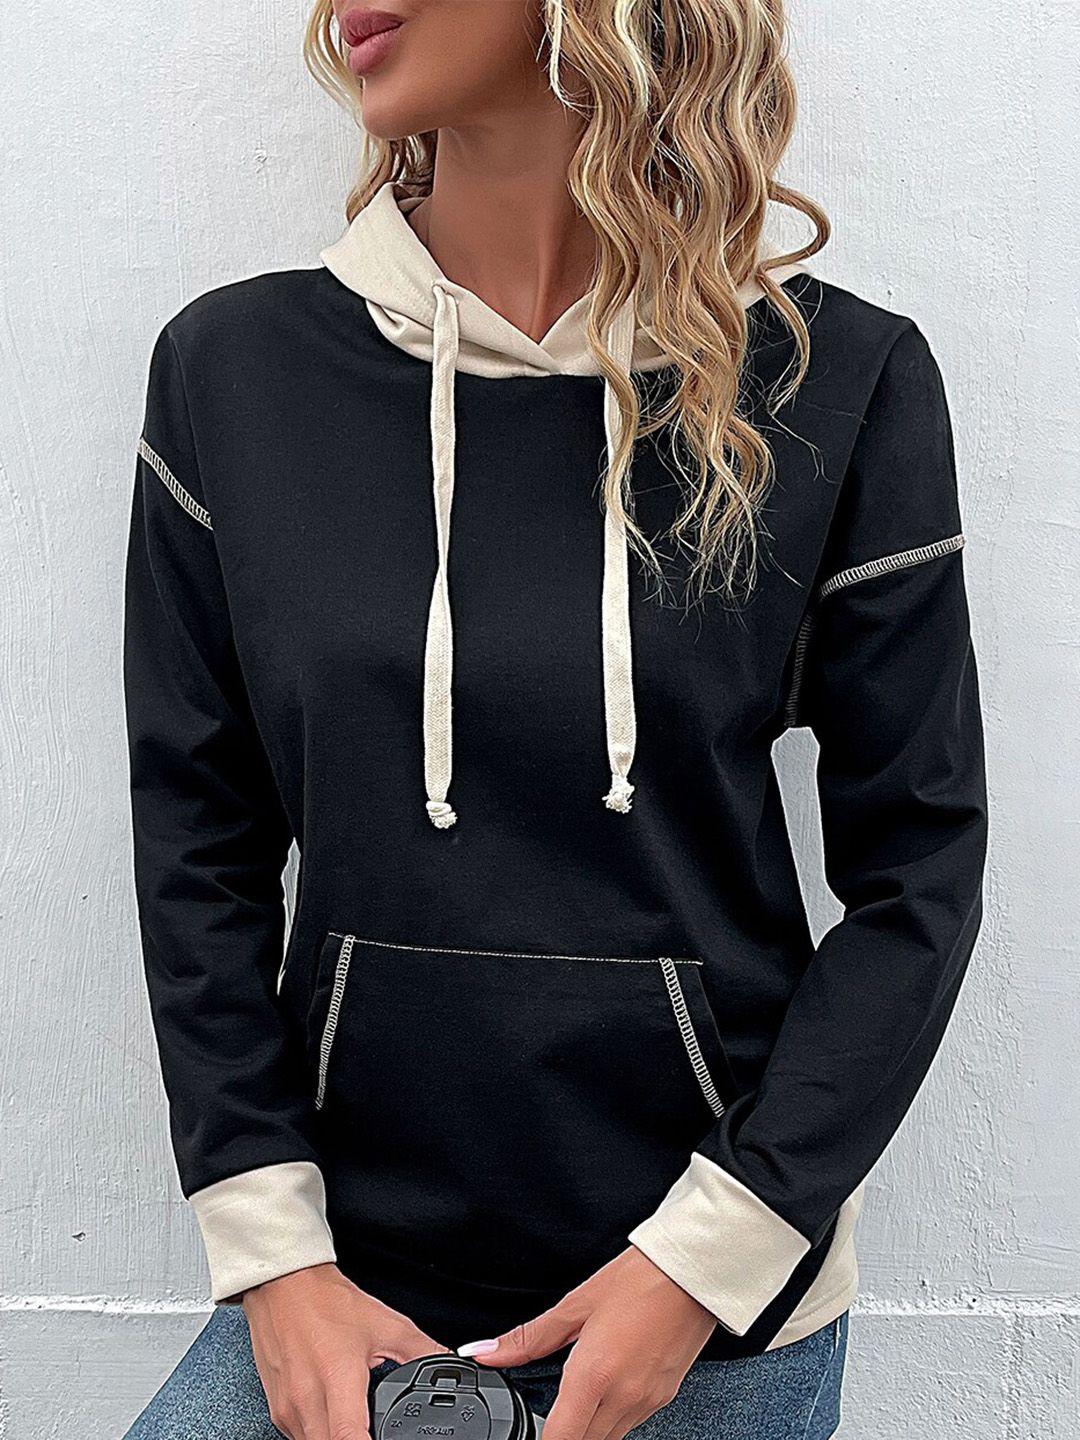 stylecast black hooded pullover